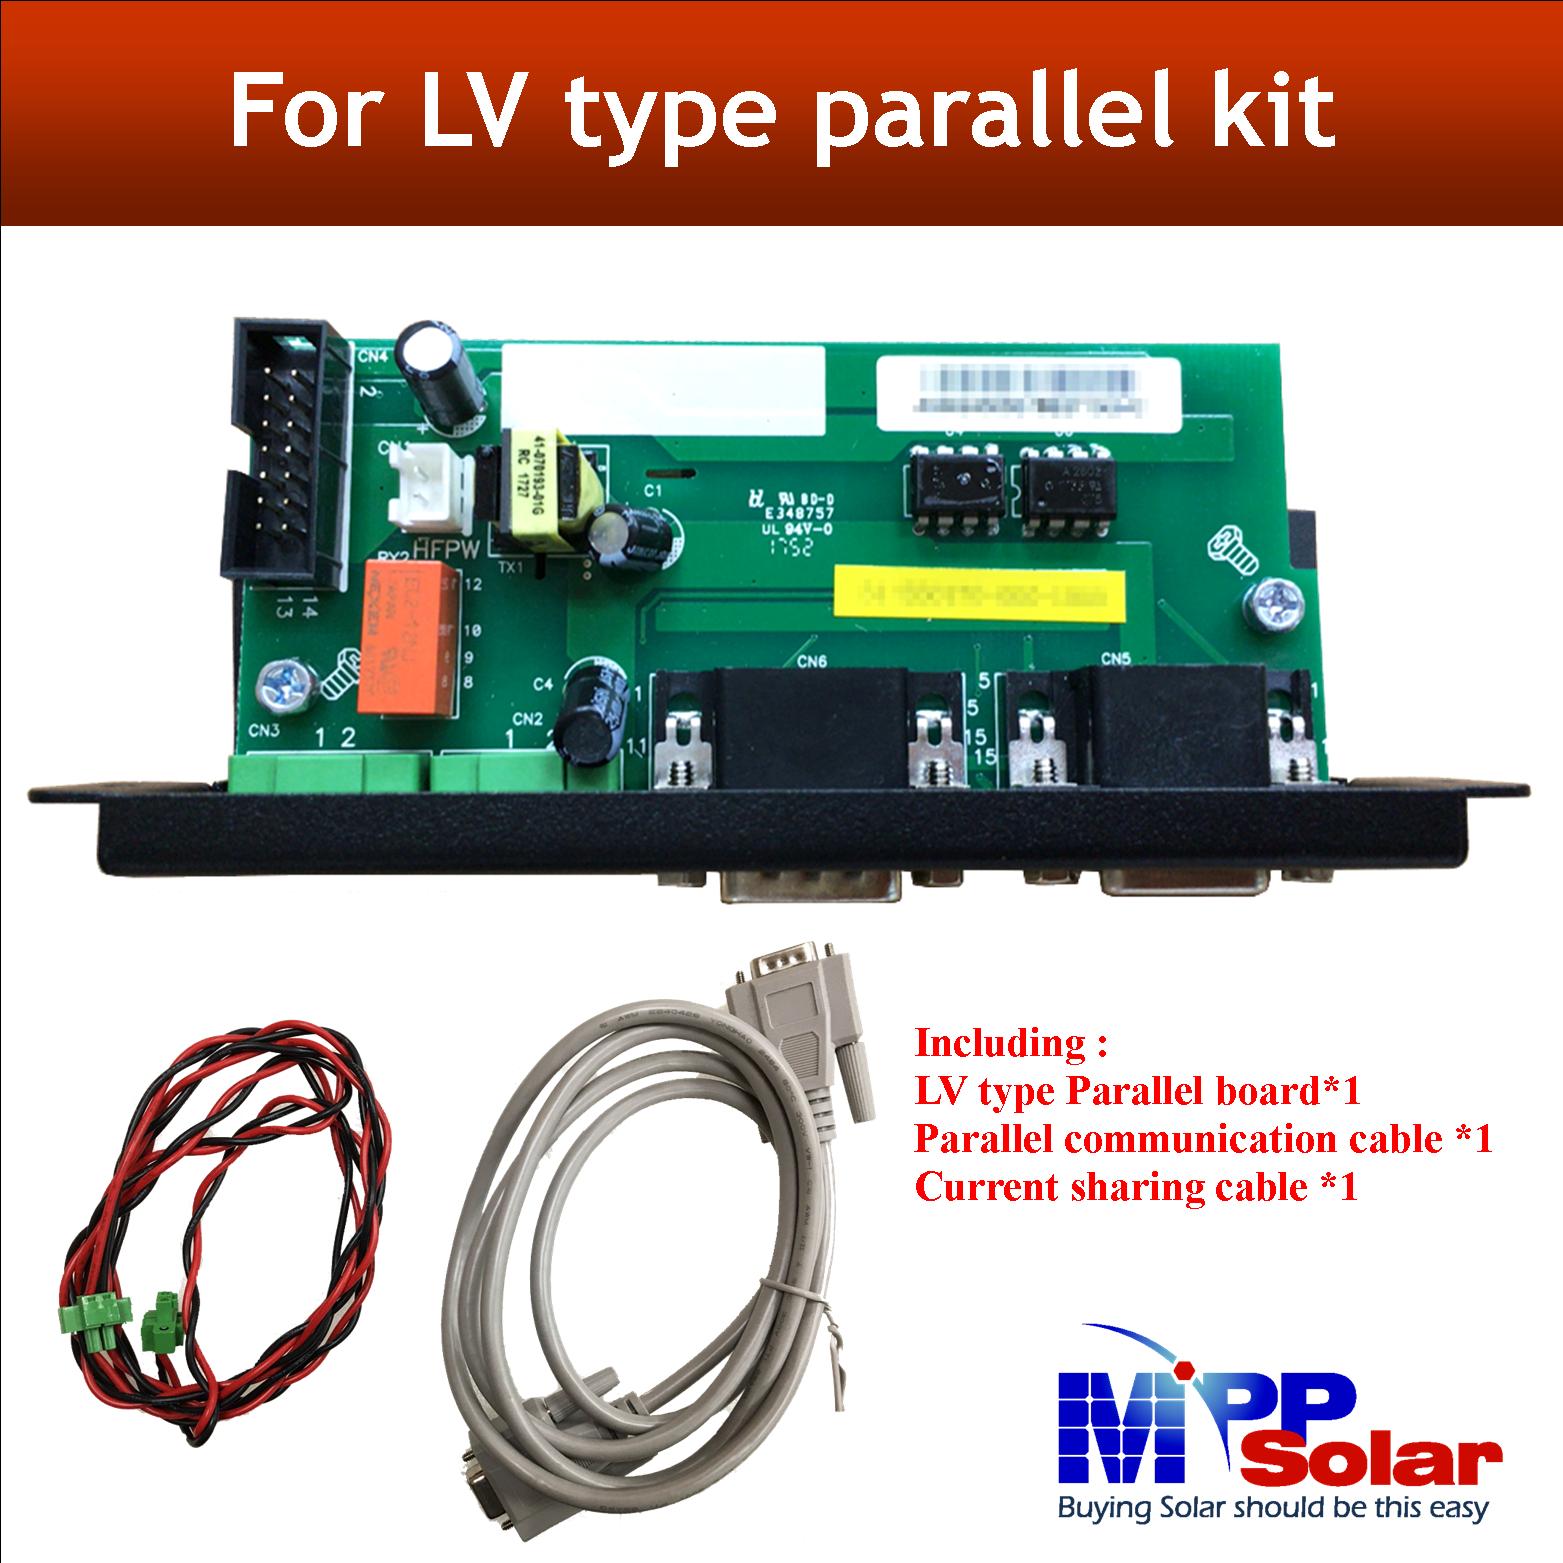 PARALLEL KIT For Authentic MPP SOLAR Particular Inverters To Enable  Parallel Function LVX6048 / Hybrid LV2424 - Buy PARALLEL KIT For Authentic MPP  SOLAR Particular Inverters To Enable Parallel Function LVX6048 /